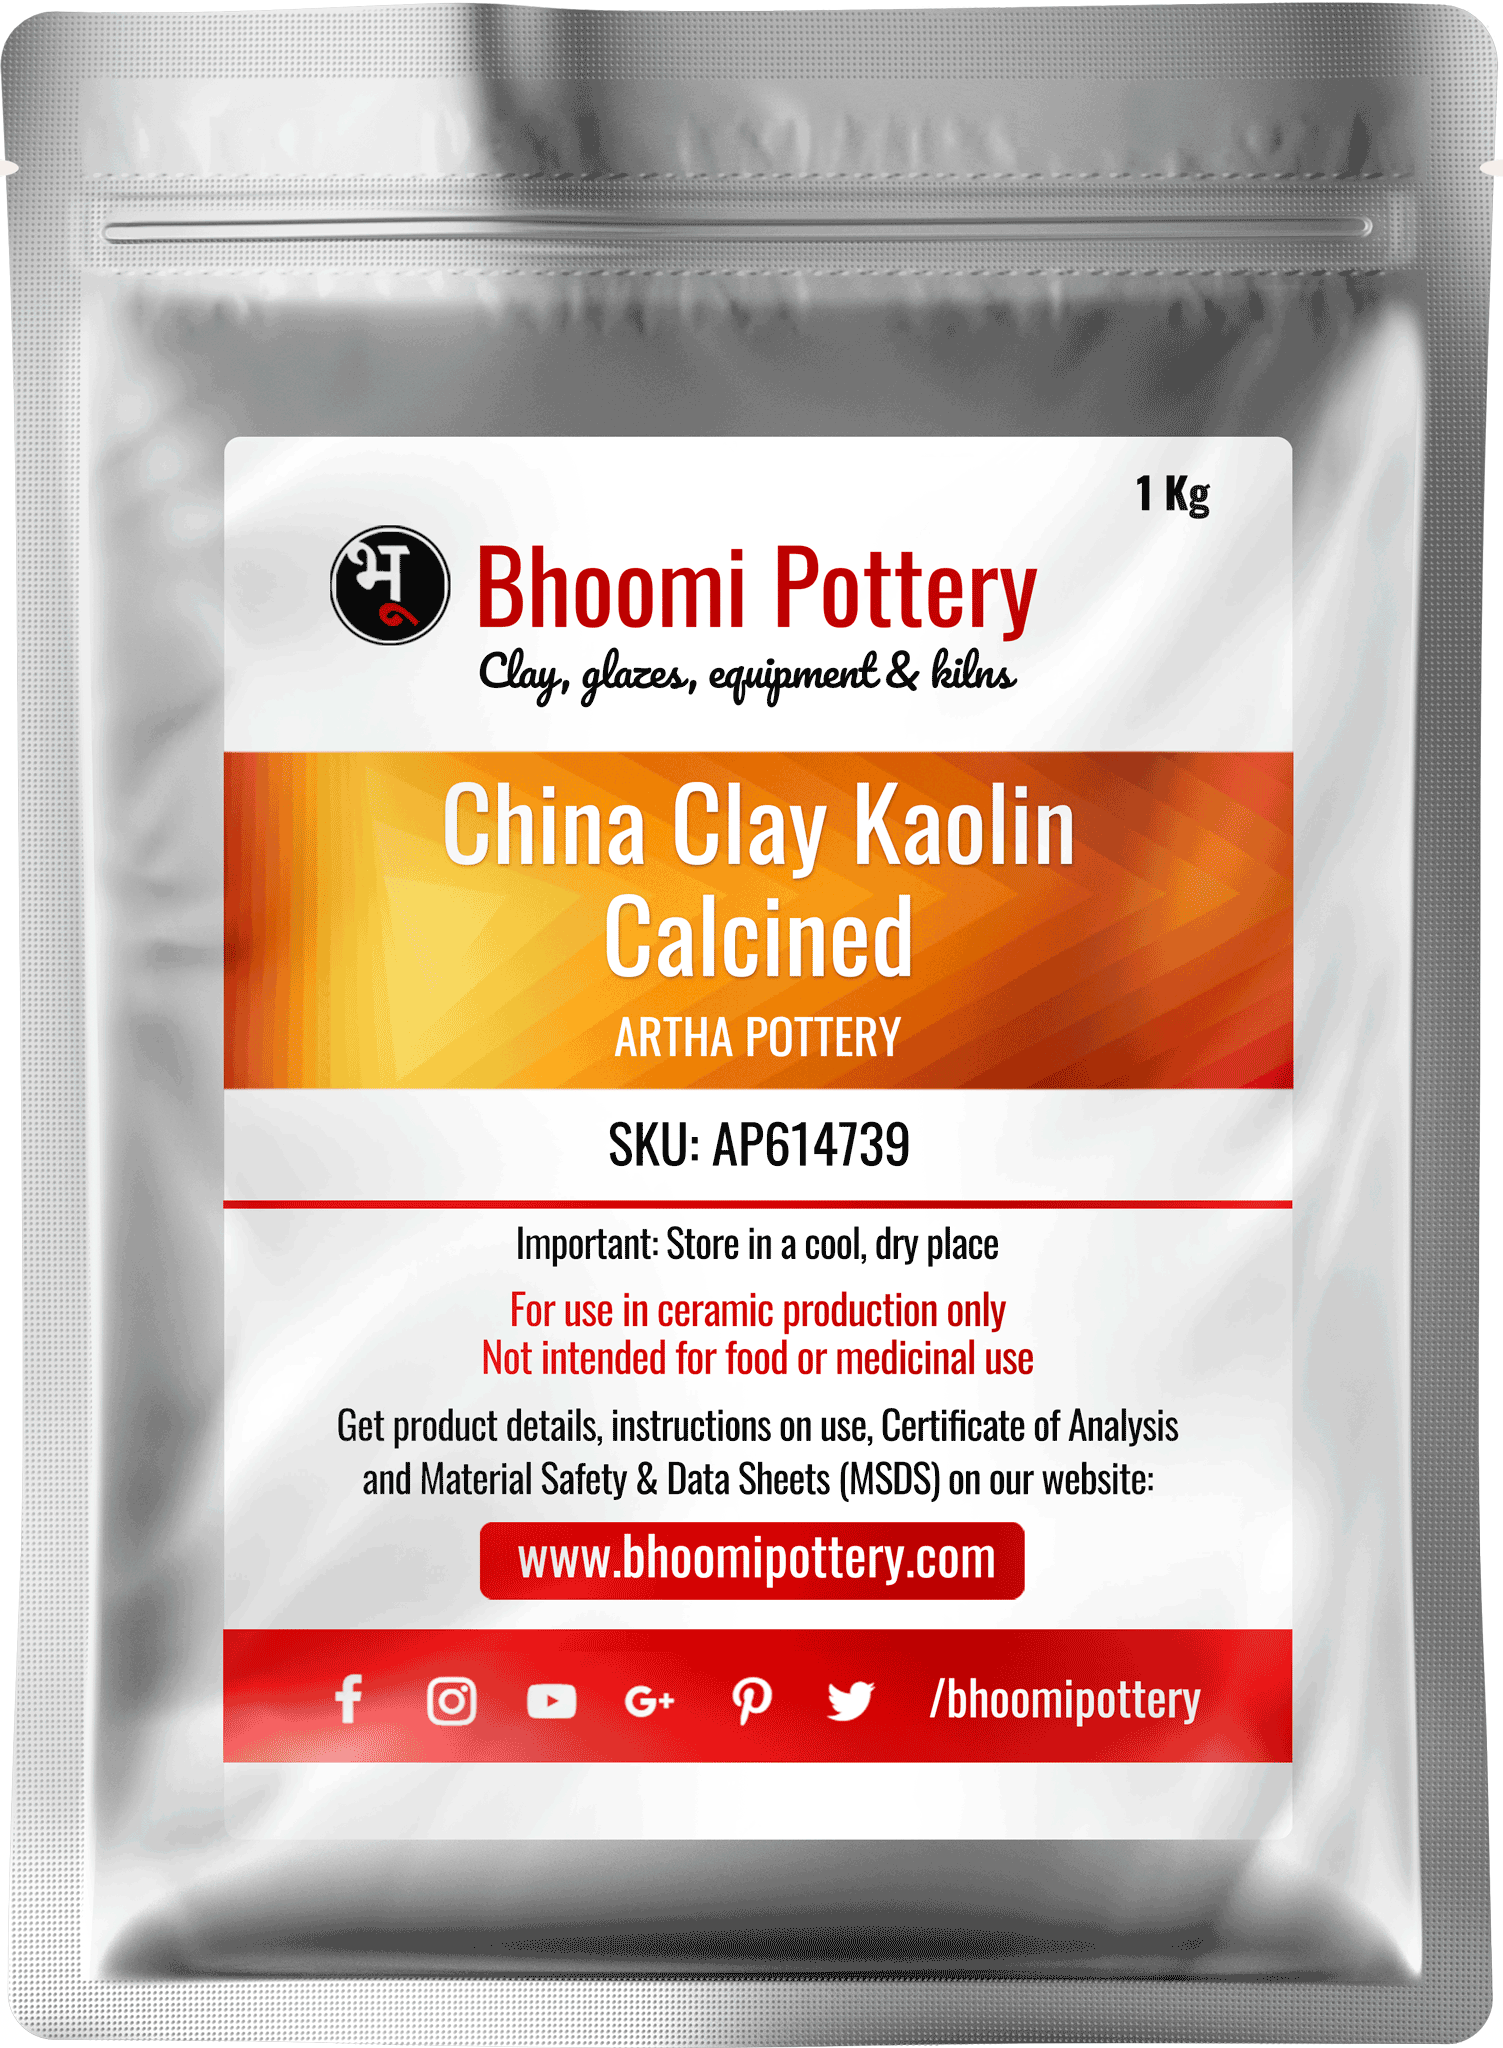 Artha Pottery China Clay Kaolin Calcined 1 Kg for sale in India - Bhoomi Pottery